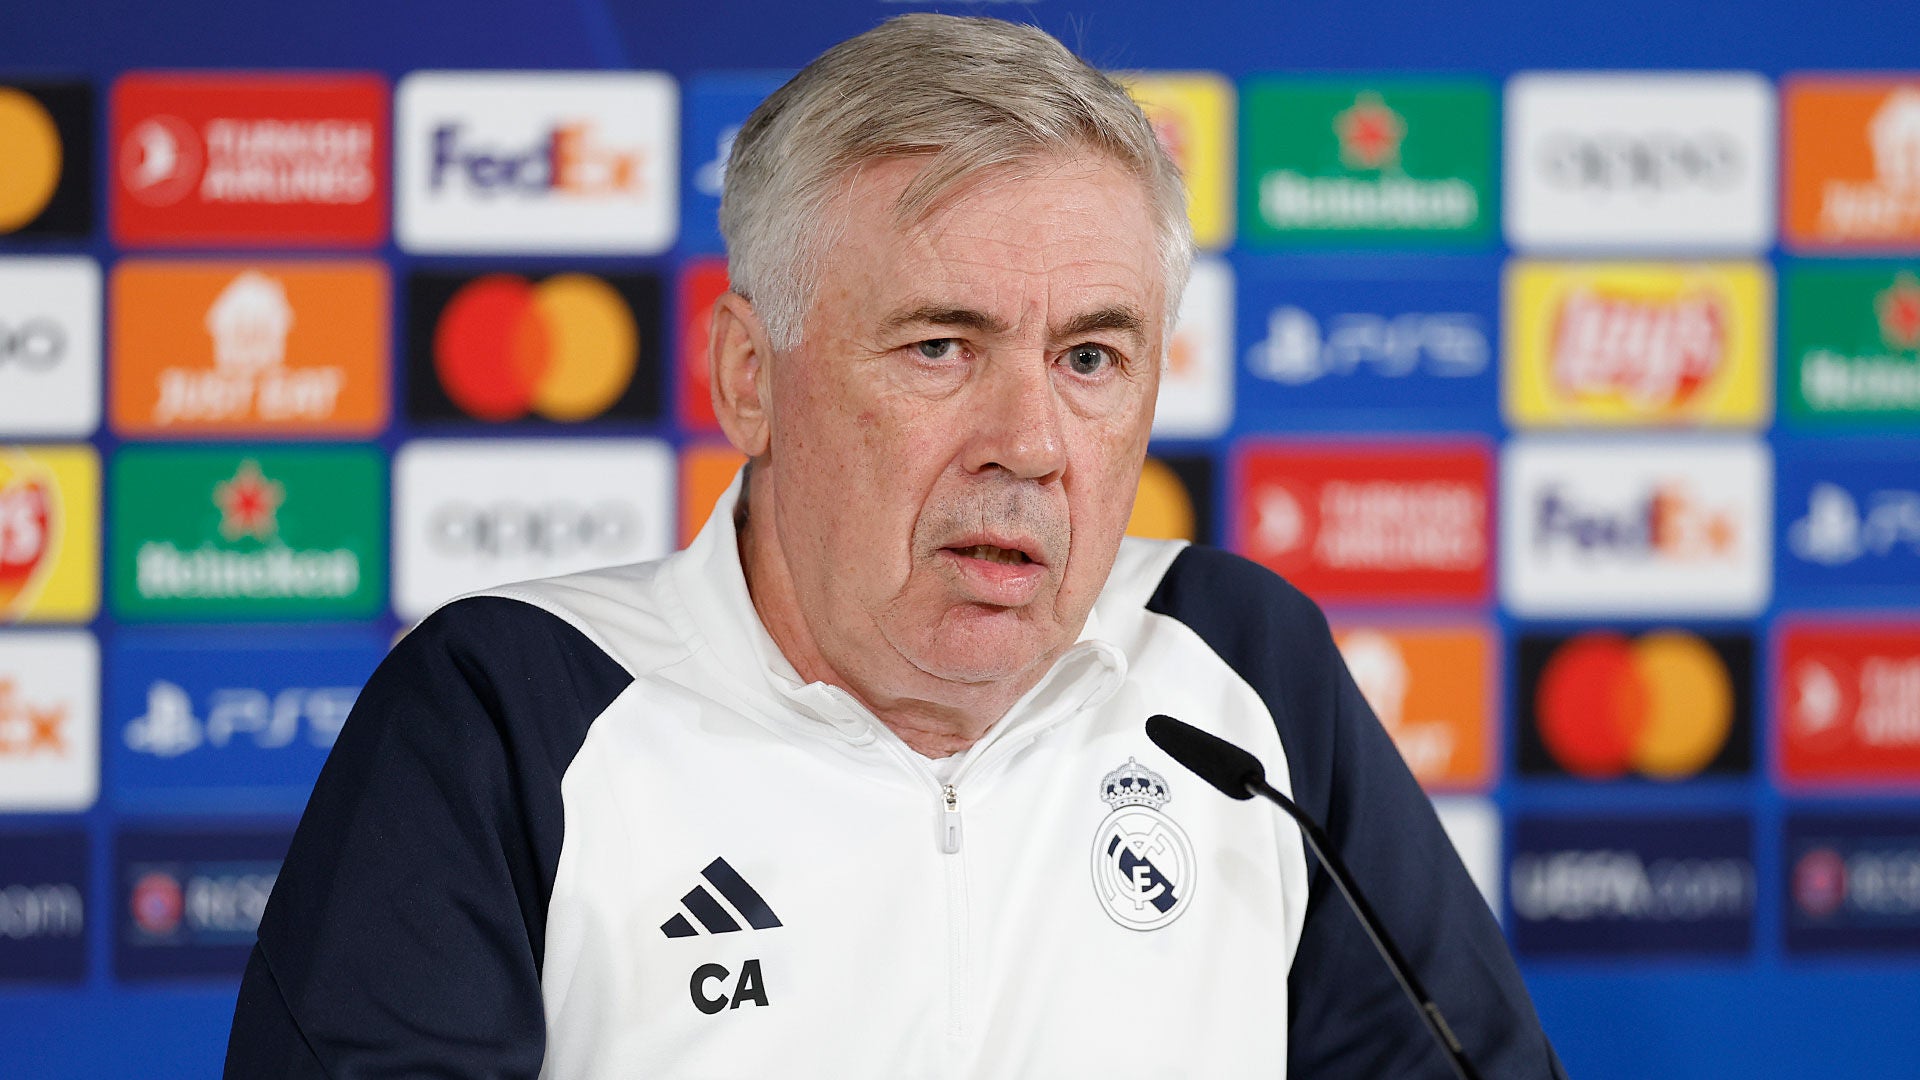 Ancelotti: “We'll have to be at our best because the tie is not over”